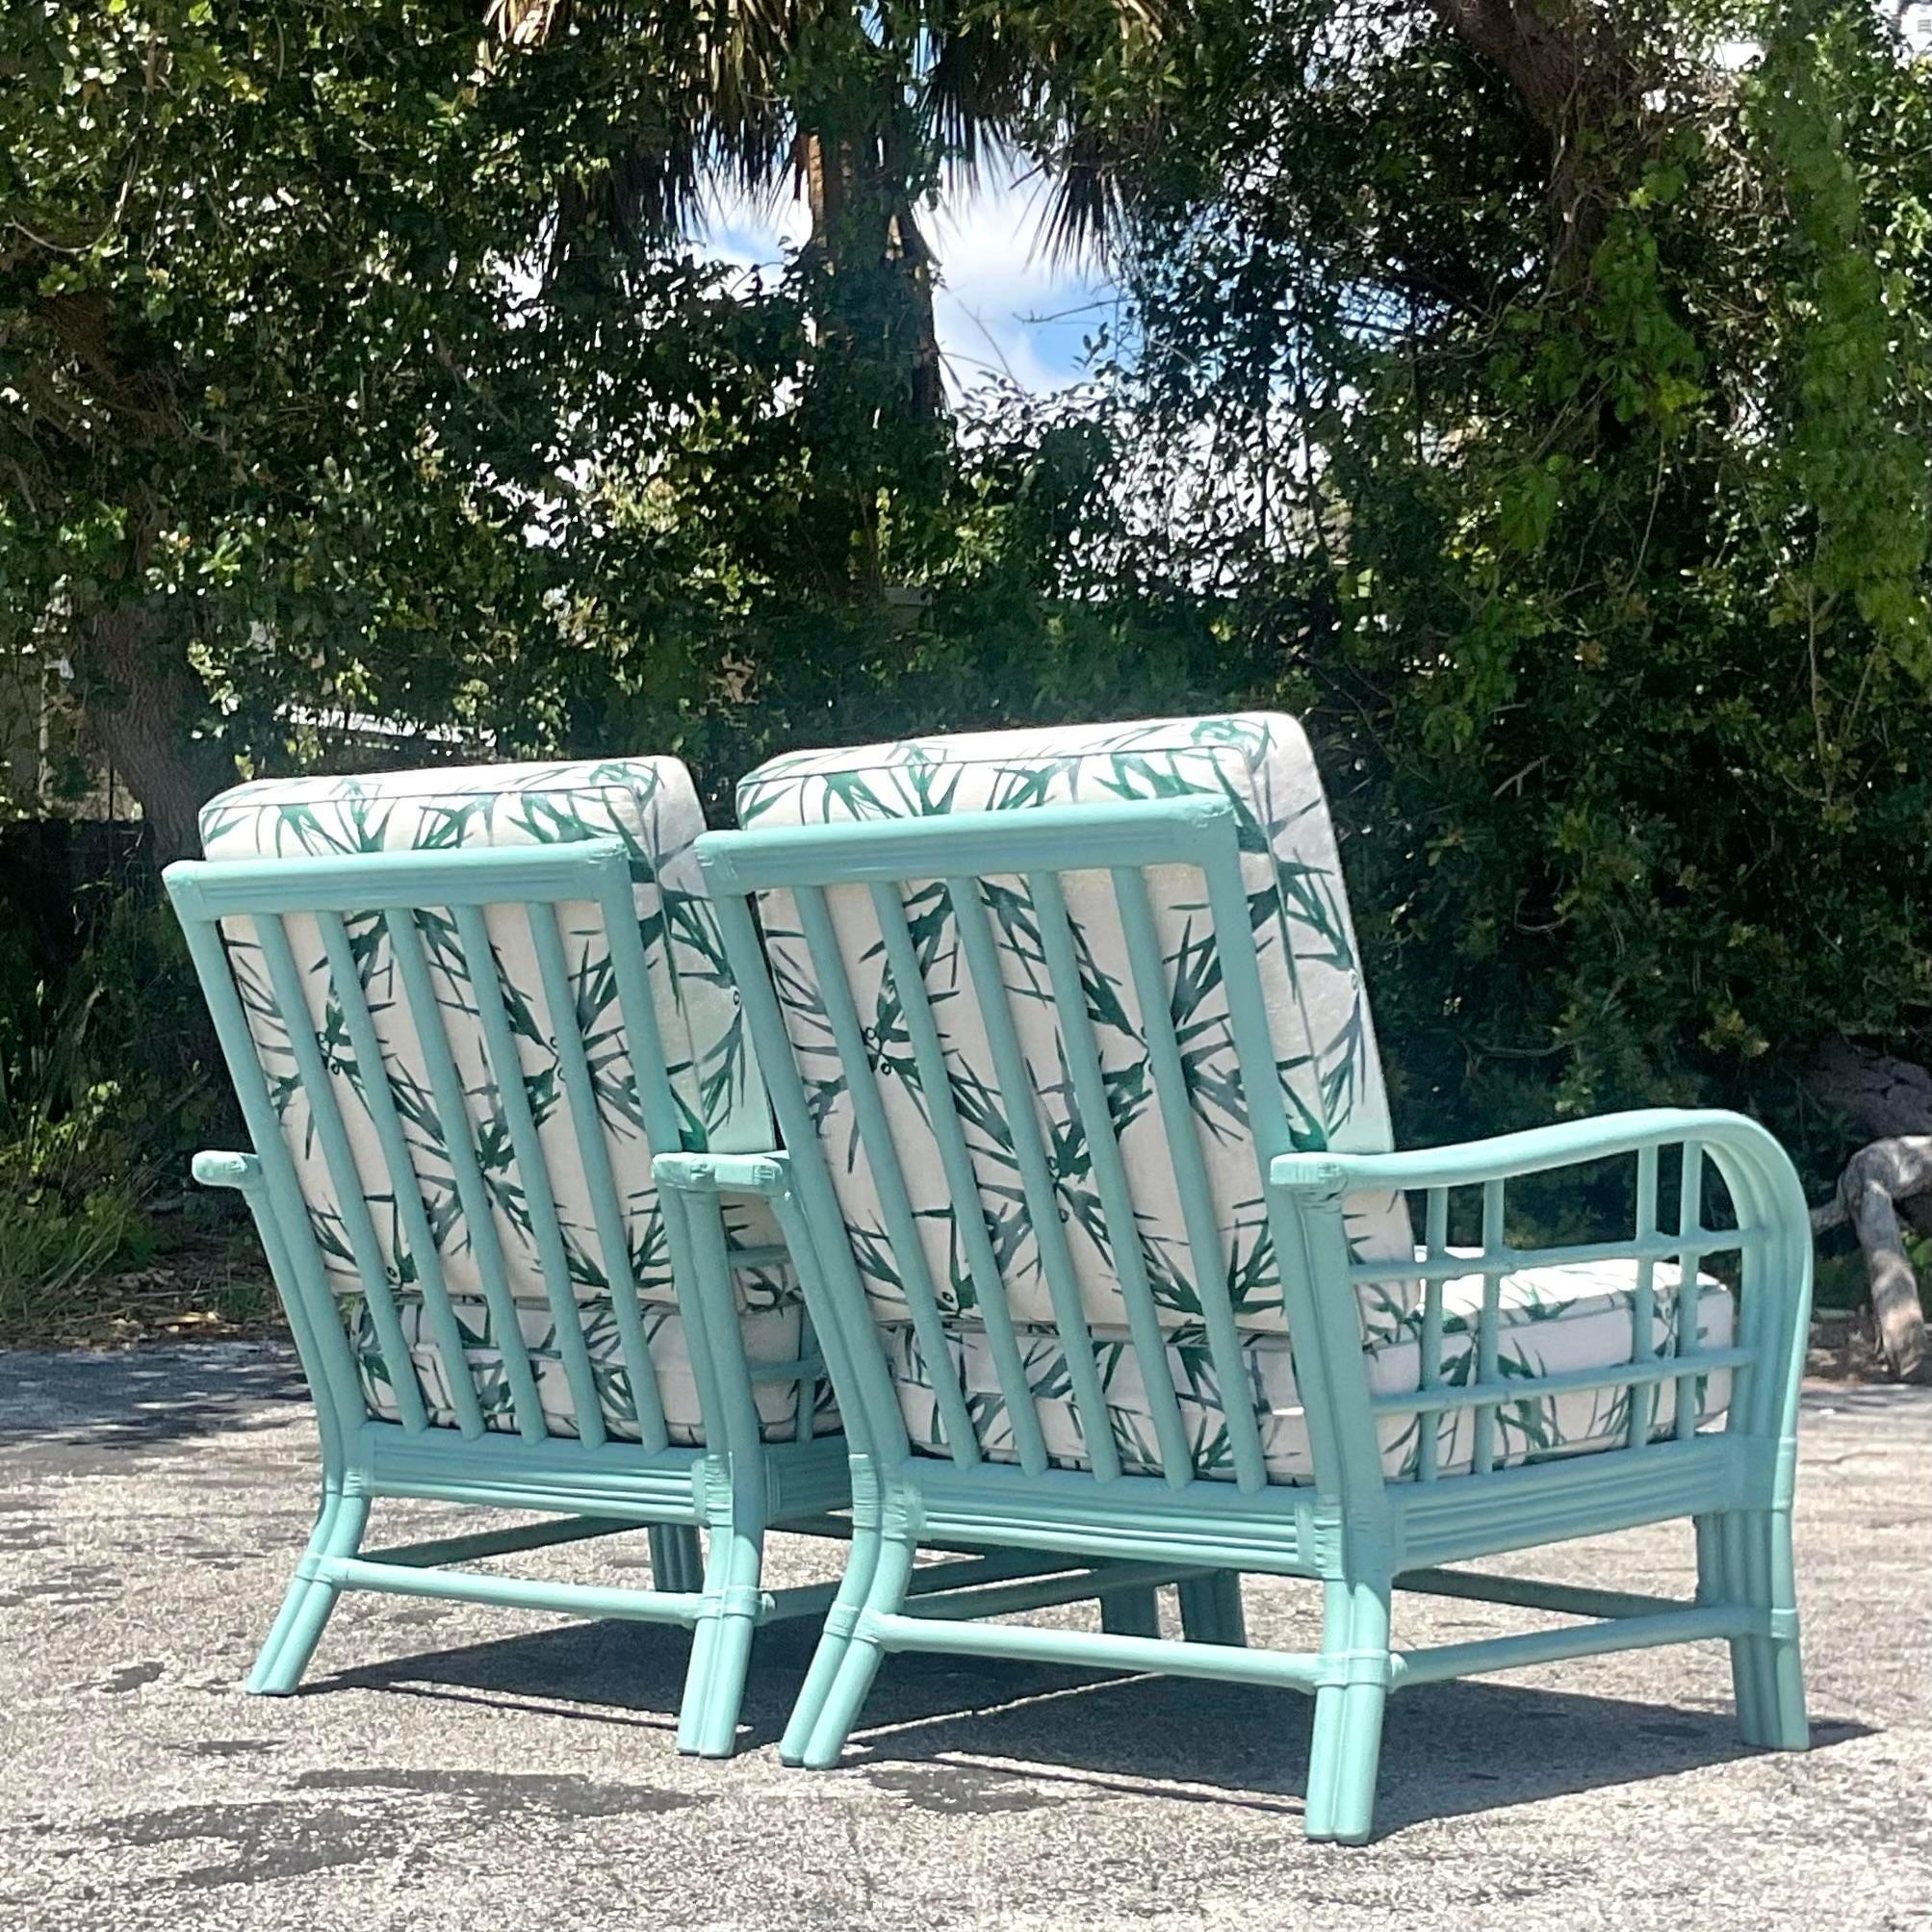 Experience coastal charm with this pair of vintage American-style lounge chairs. Crafted from bent rattan and painted to perfection, they offer a blend of comfort and timeless elegance. Ideal for adding a relaxed, beachy vibe to any space. Acquired